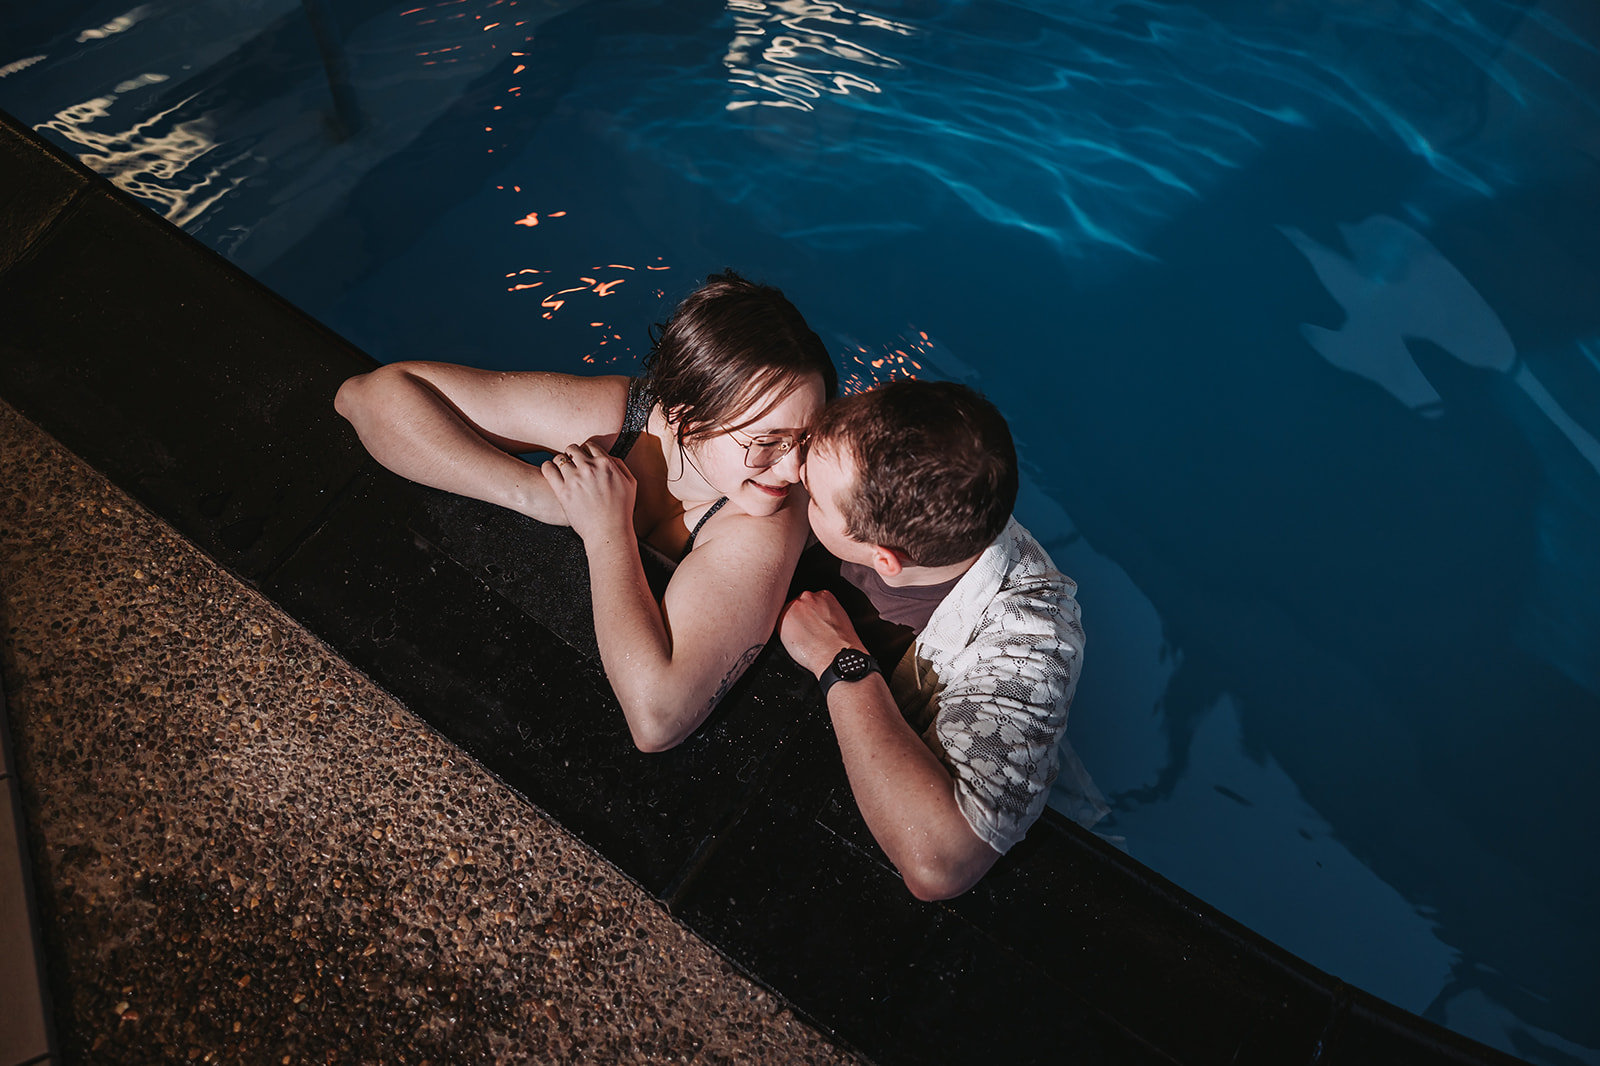 nighttime couples photos at a pool in minneapolis